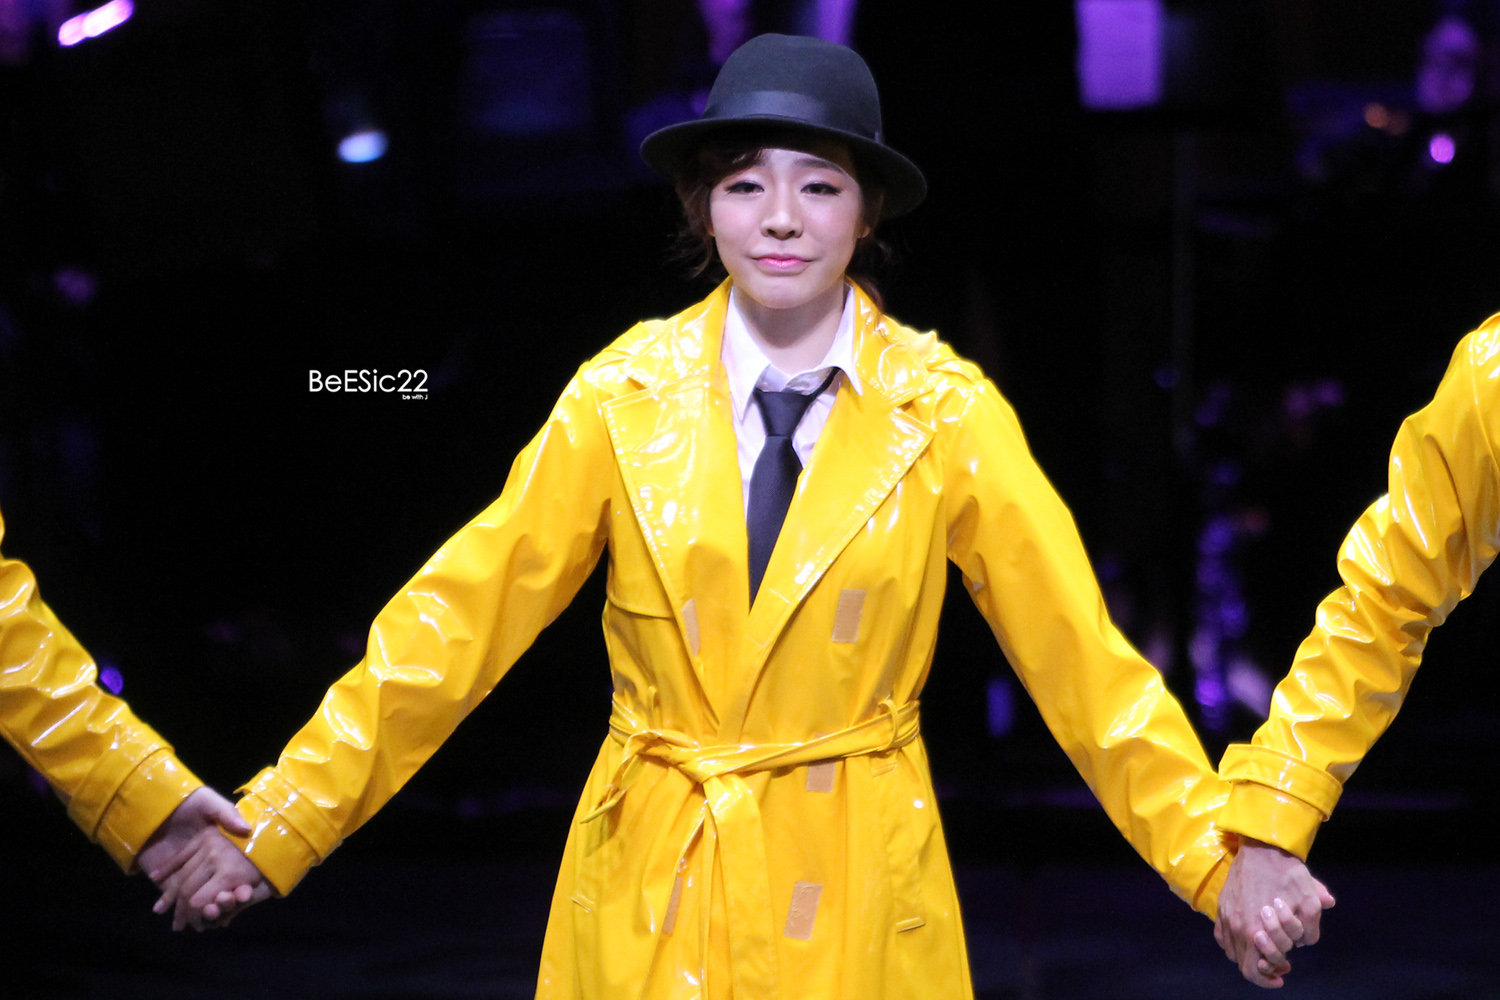 [OTHER][29-04-2014]Sunny sẽ tham gia vở nhạc kịch "SINGIN' IN THE RAIN" - Page 2 21755C5053A5911731ABC8